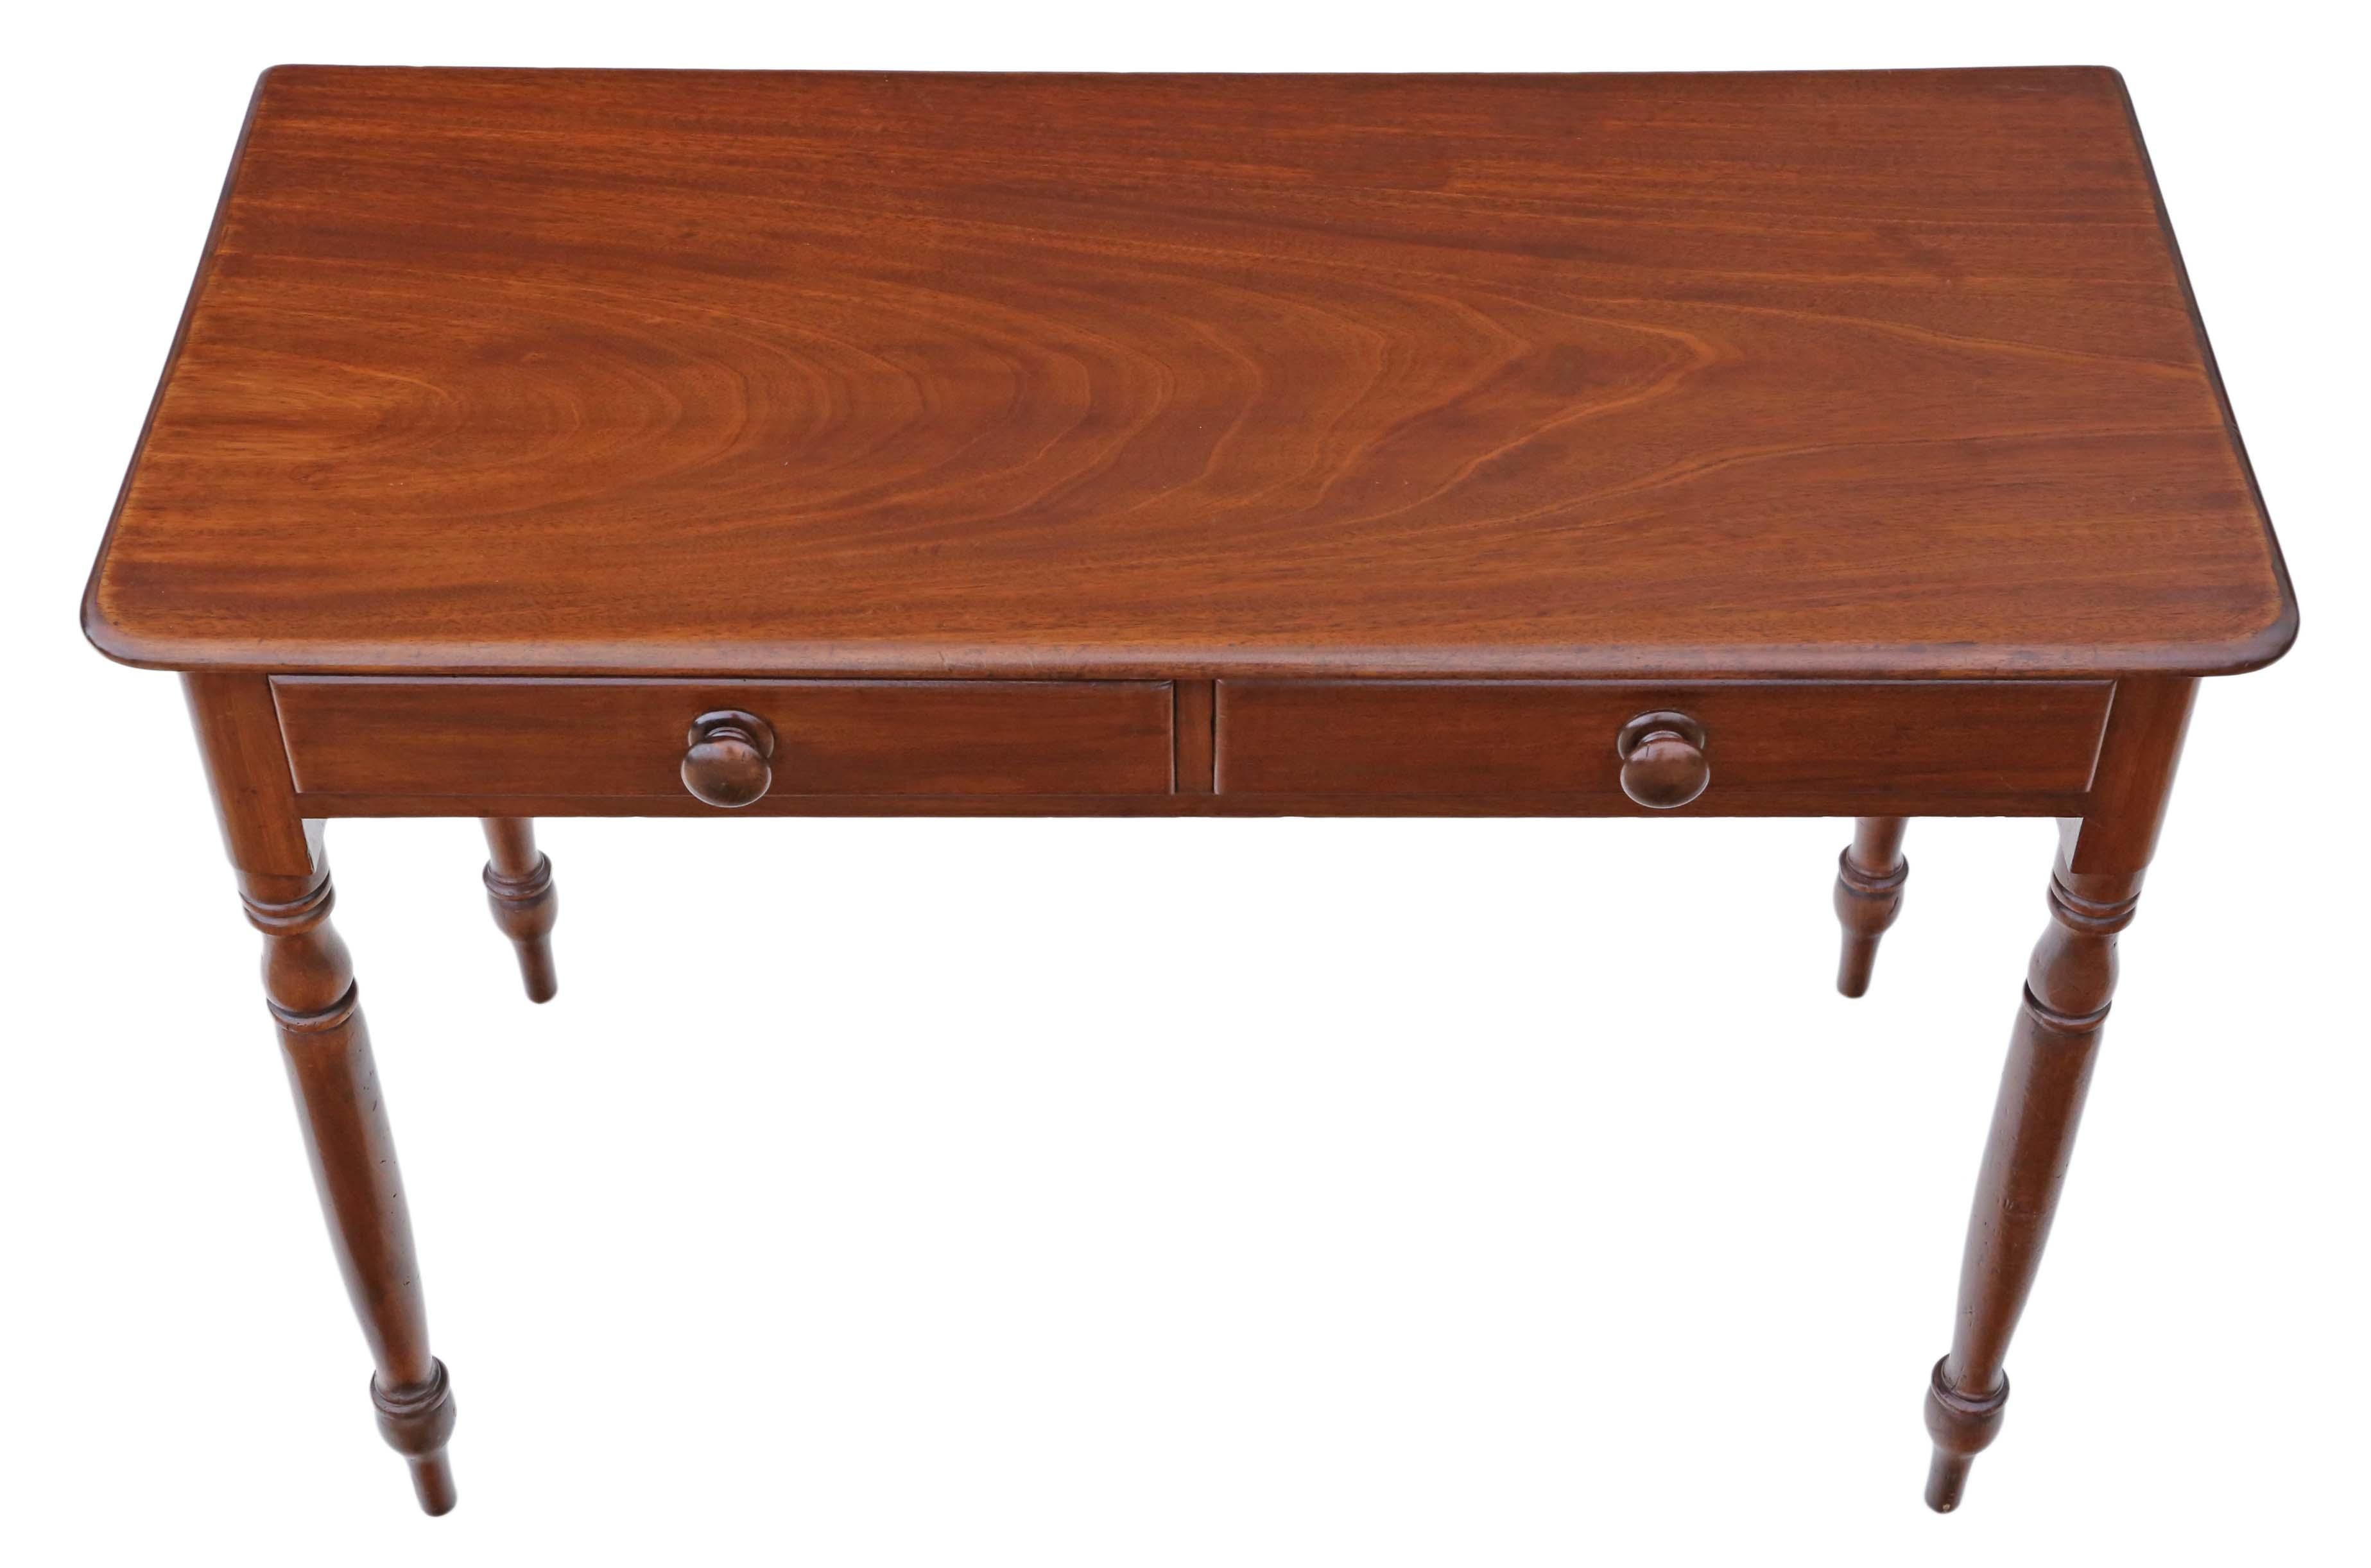 Antique Victorian circa 1880 mahogany writing dressing table desk.
Fabulous proportions, would look great in the right location. No woodworm.
The table is solid, with no loose joints and the drawers slide freely.
Overall dimensions: 107 cm W x 51